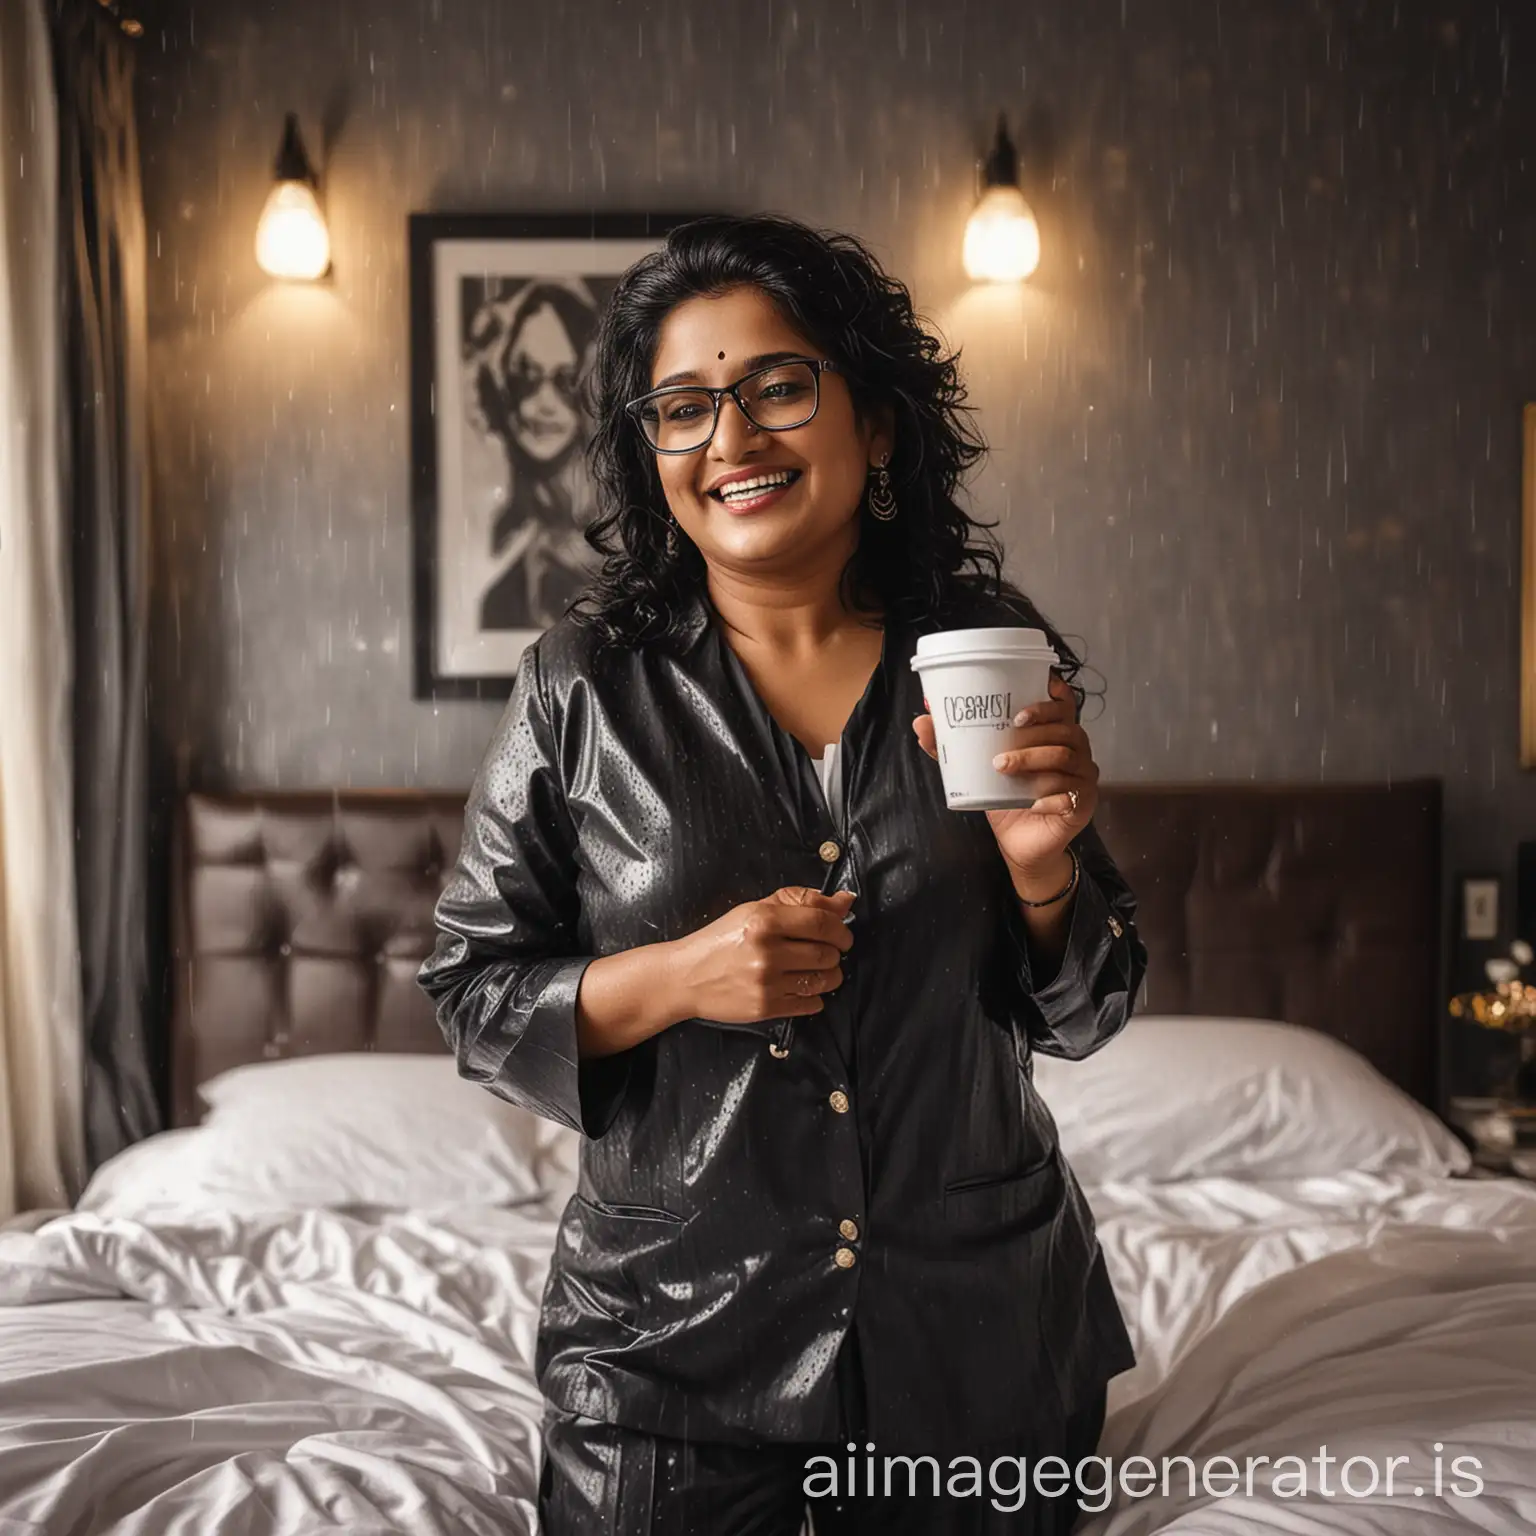 Indian-Woman-Sleeping-on-Luxurious-Bed-in-Rainy-Evening-with-Coffee